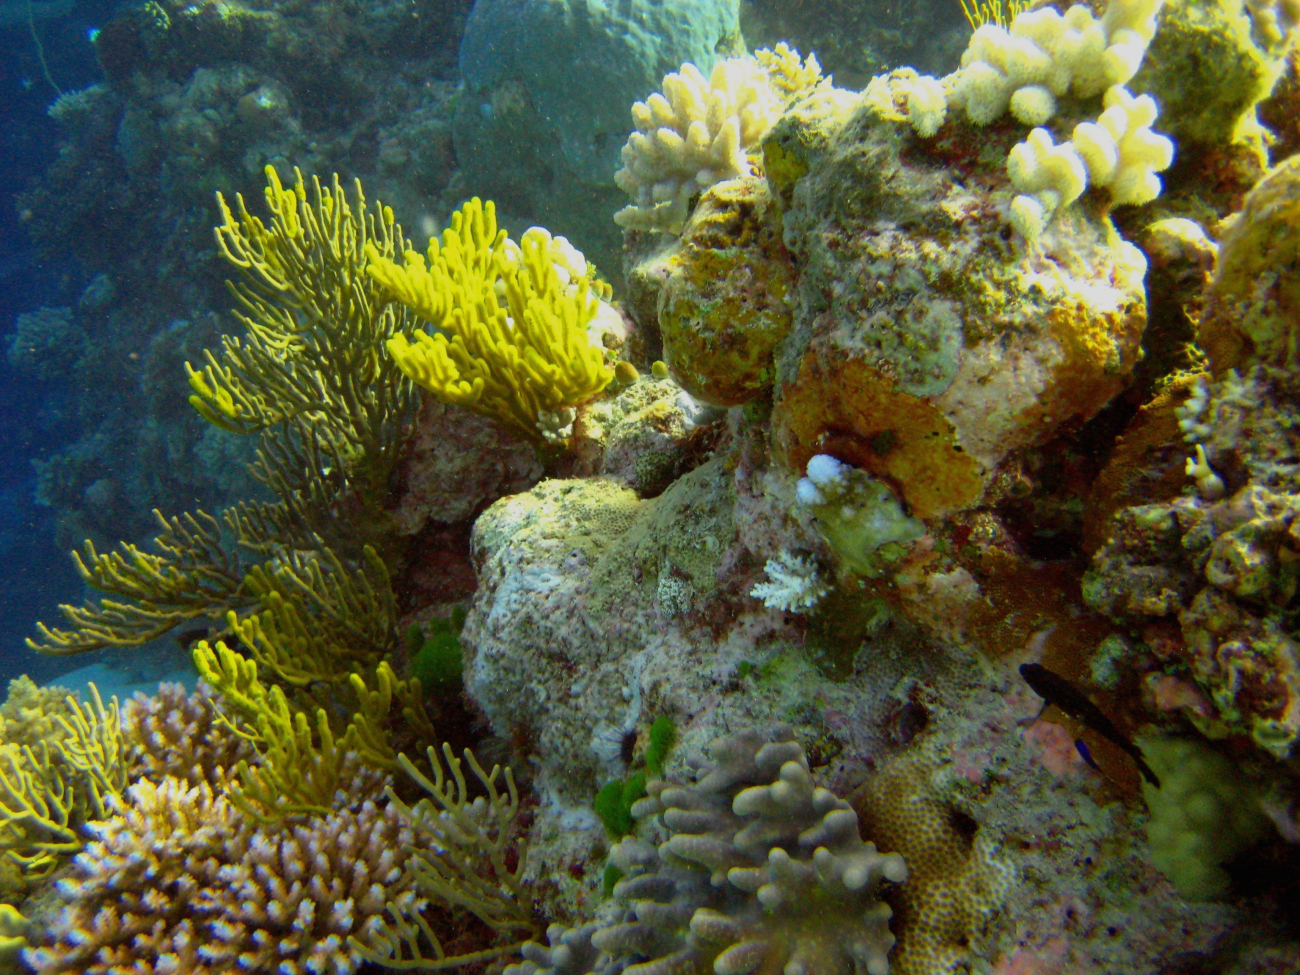 Reef scene with coral and algae